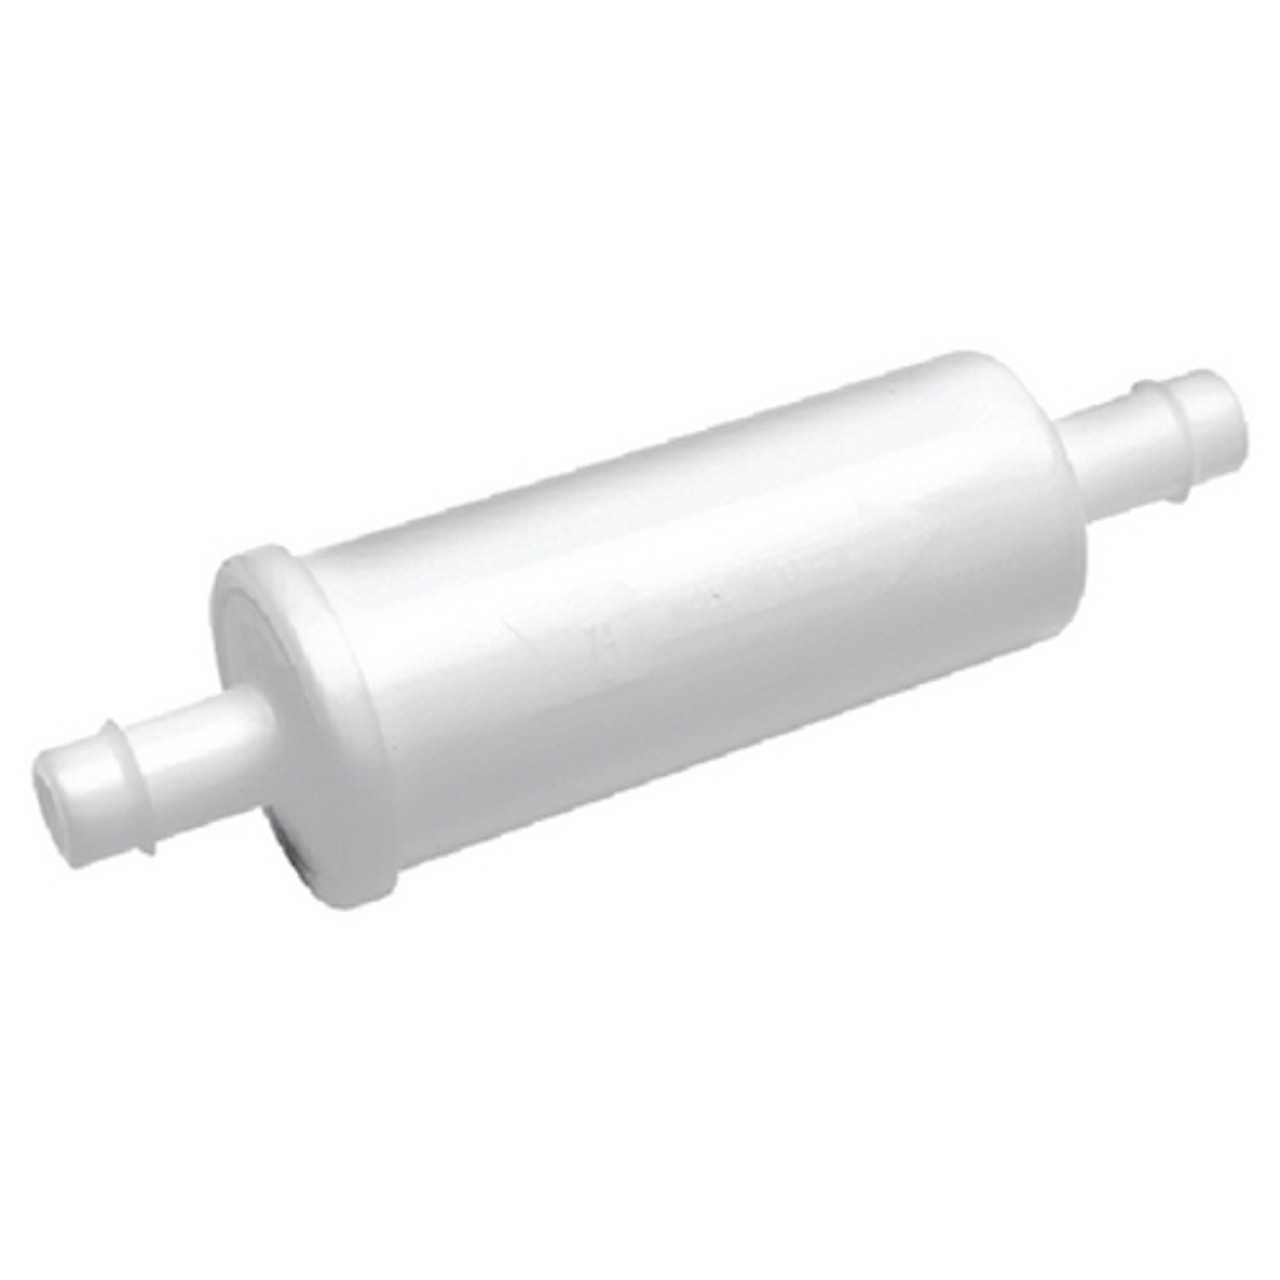 Universal 5/16" In Line Fuel Filter for Carbureted Engines